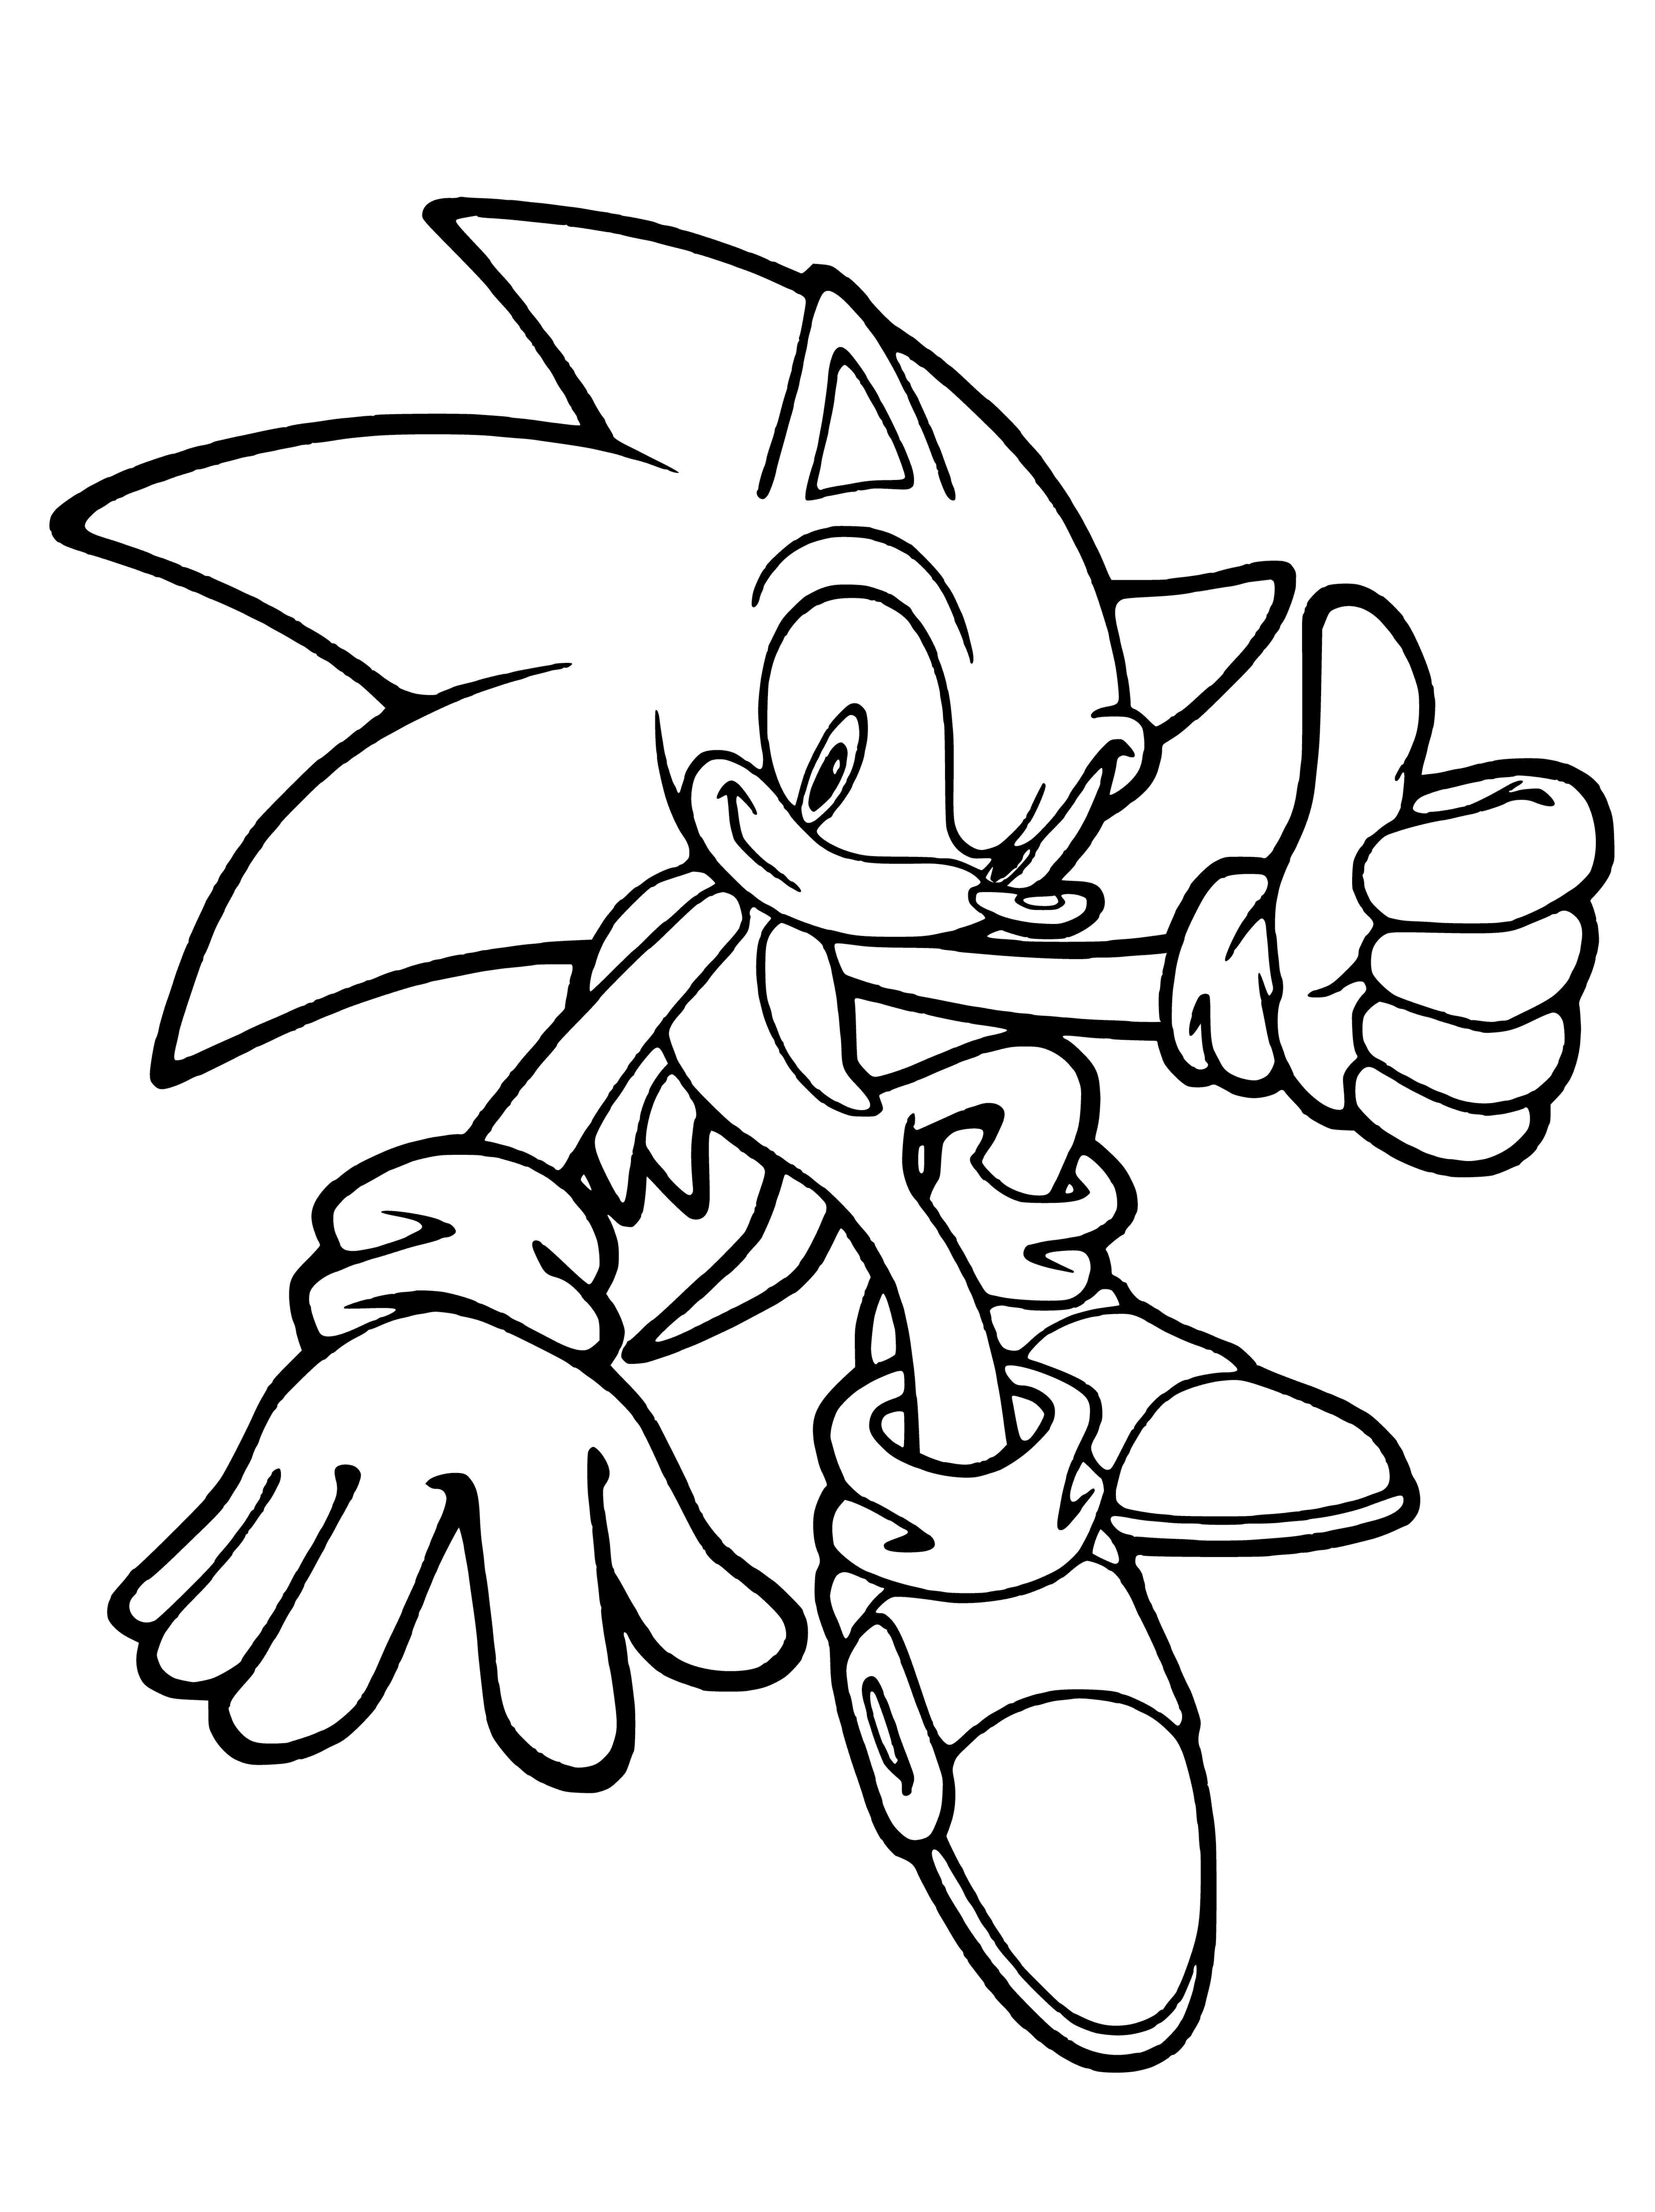 Sonic coloring page